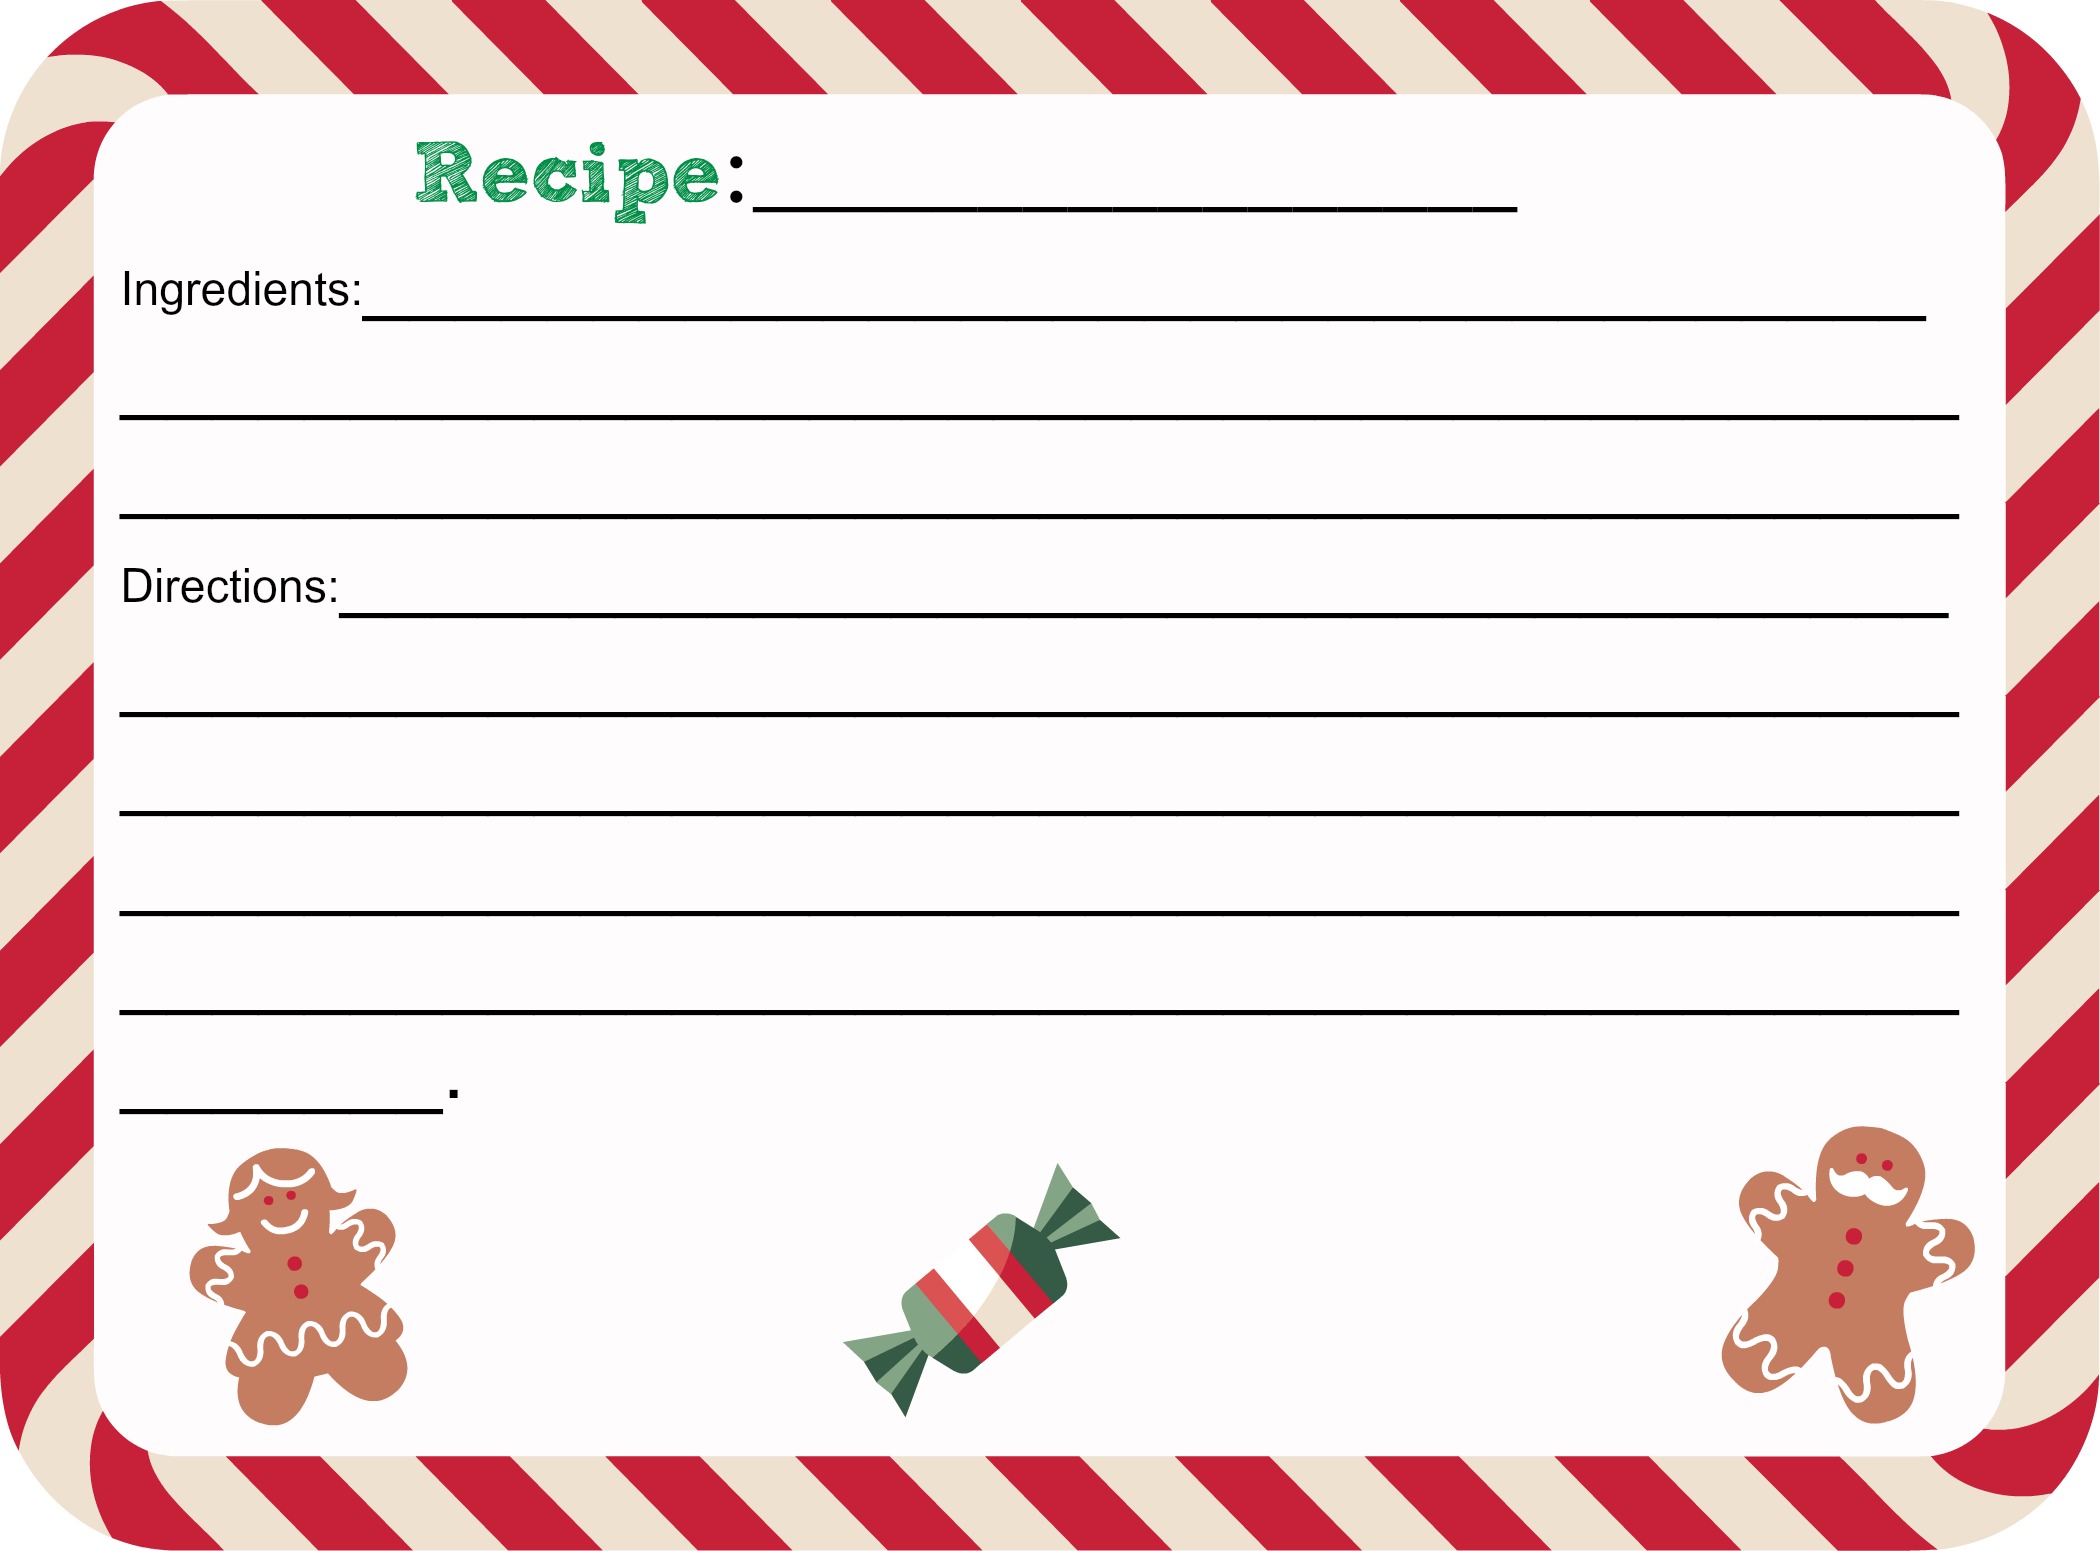 8-best-images-of-free-printable-cute-recipe-card-template-free